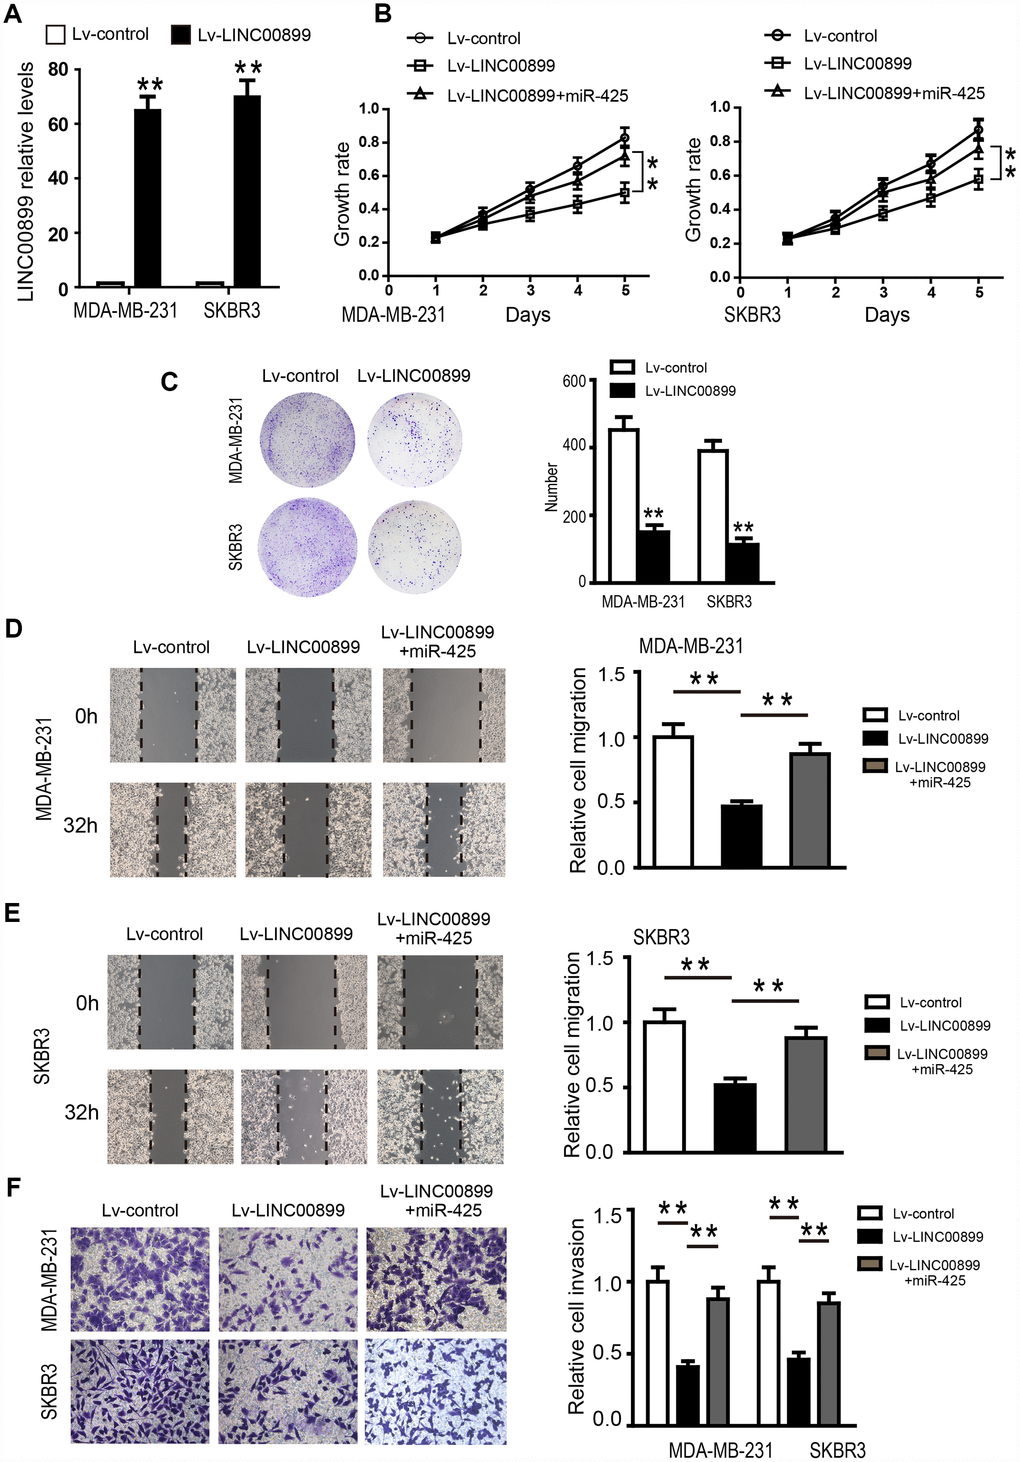 Overexpression of LINC00899 inhibits BC cell proliferation, colony formation, migration and invasion. (A) MDA-MB-231 and SKBR3 cells were transfected with LINC00899-carrying lentivirus (Lv-LINC00899) or control lentivirus (Lv-control) followed by qRT-PCR analysis of the relative LINC00899 expression levels. (B–E) Cells transfected with Lv-control, Lv-LINC00899 or Lv-LINC00899 plus miR-425 mimic. CCK8 (B) and colony formation (C) assays were used to assess proliferation of MDA-MB-231 and SKBR3 cells. Wound healing assays were performed to assess migration of MDA-MB-231 (D) and SKBR3 (E) cells. Transwell invasion assays were performed to assess invasion by MDA-MB-231and SKBR3cells (F). Data presented as means ± SD.**p